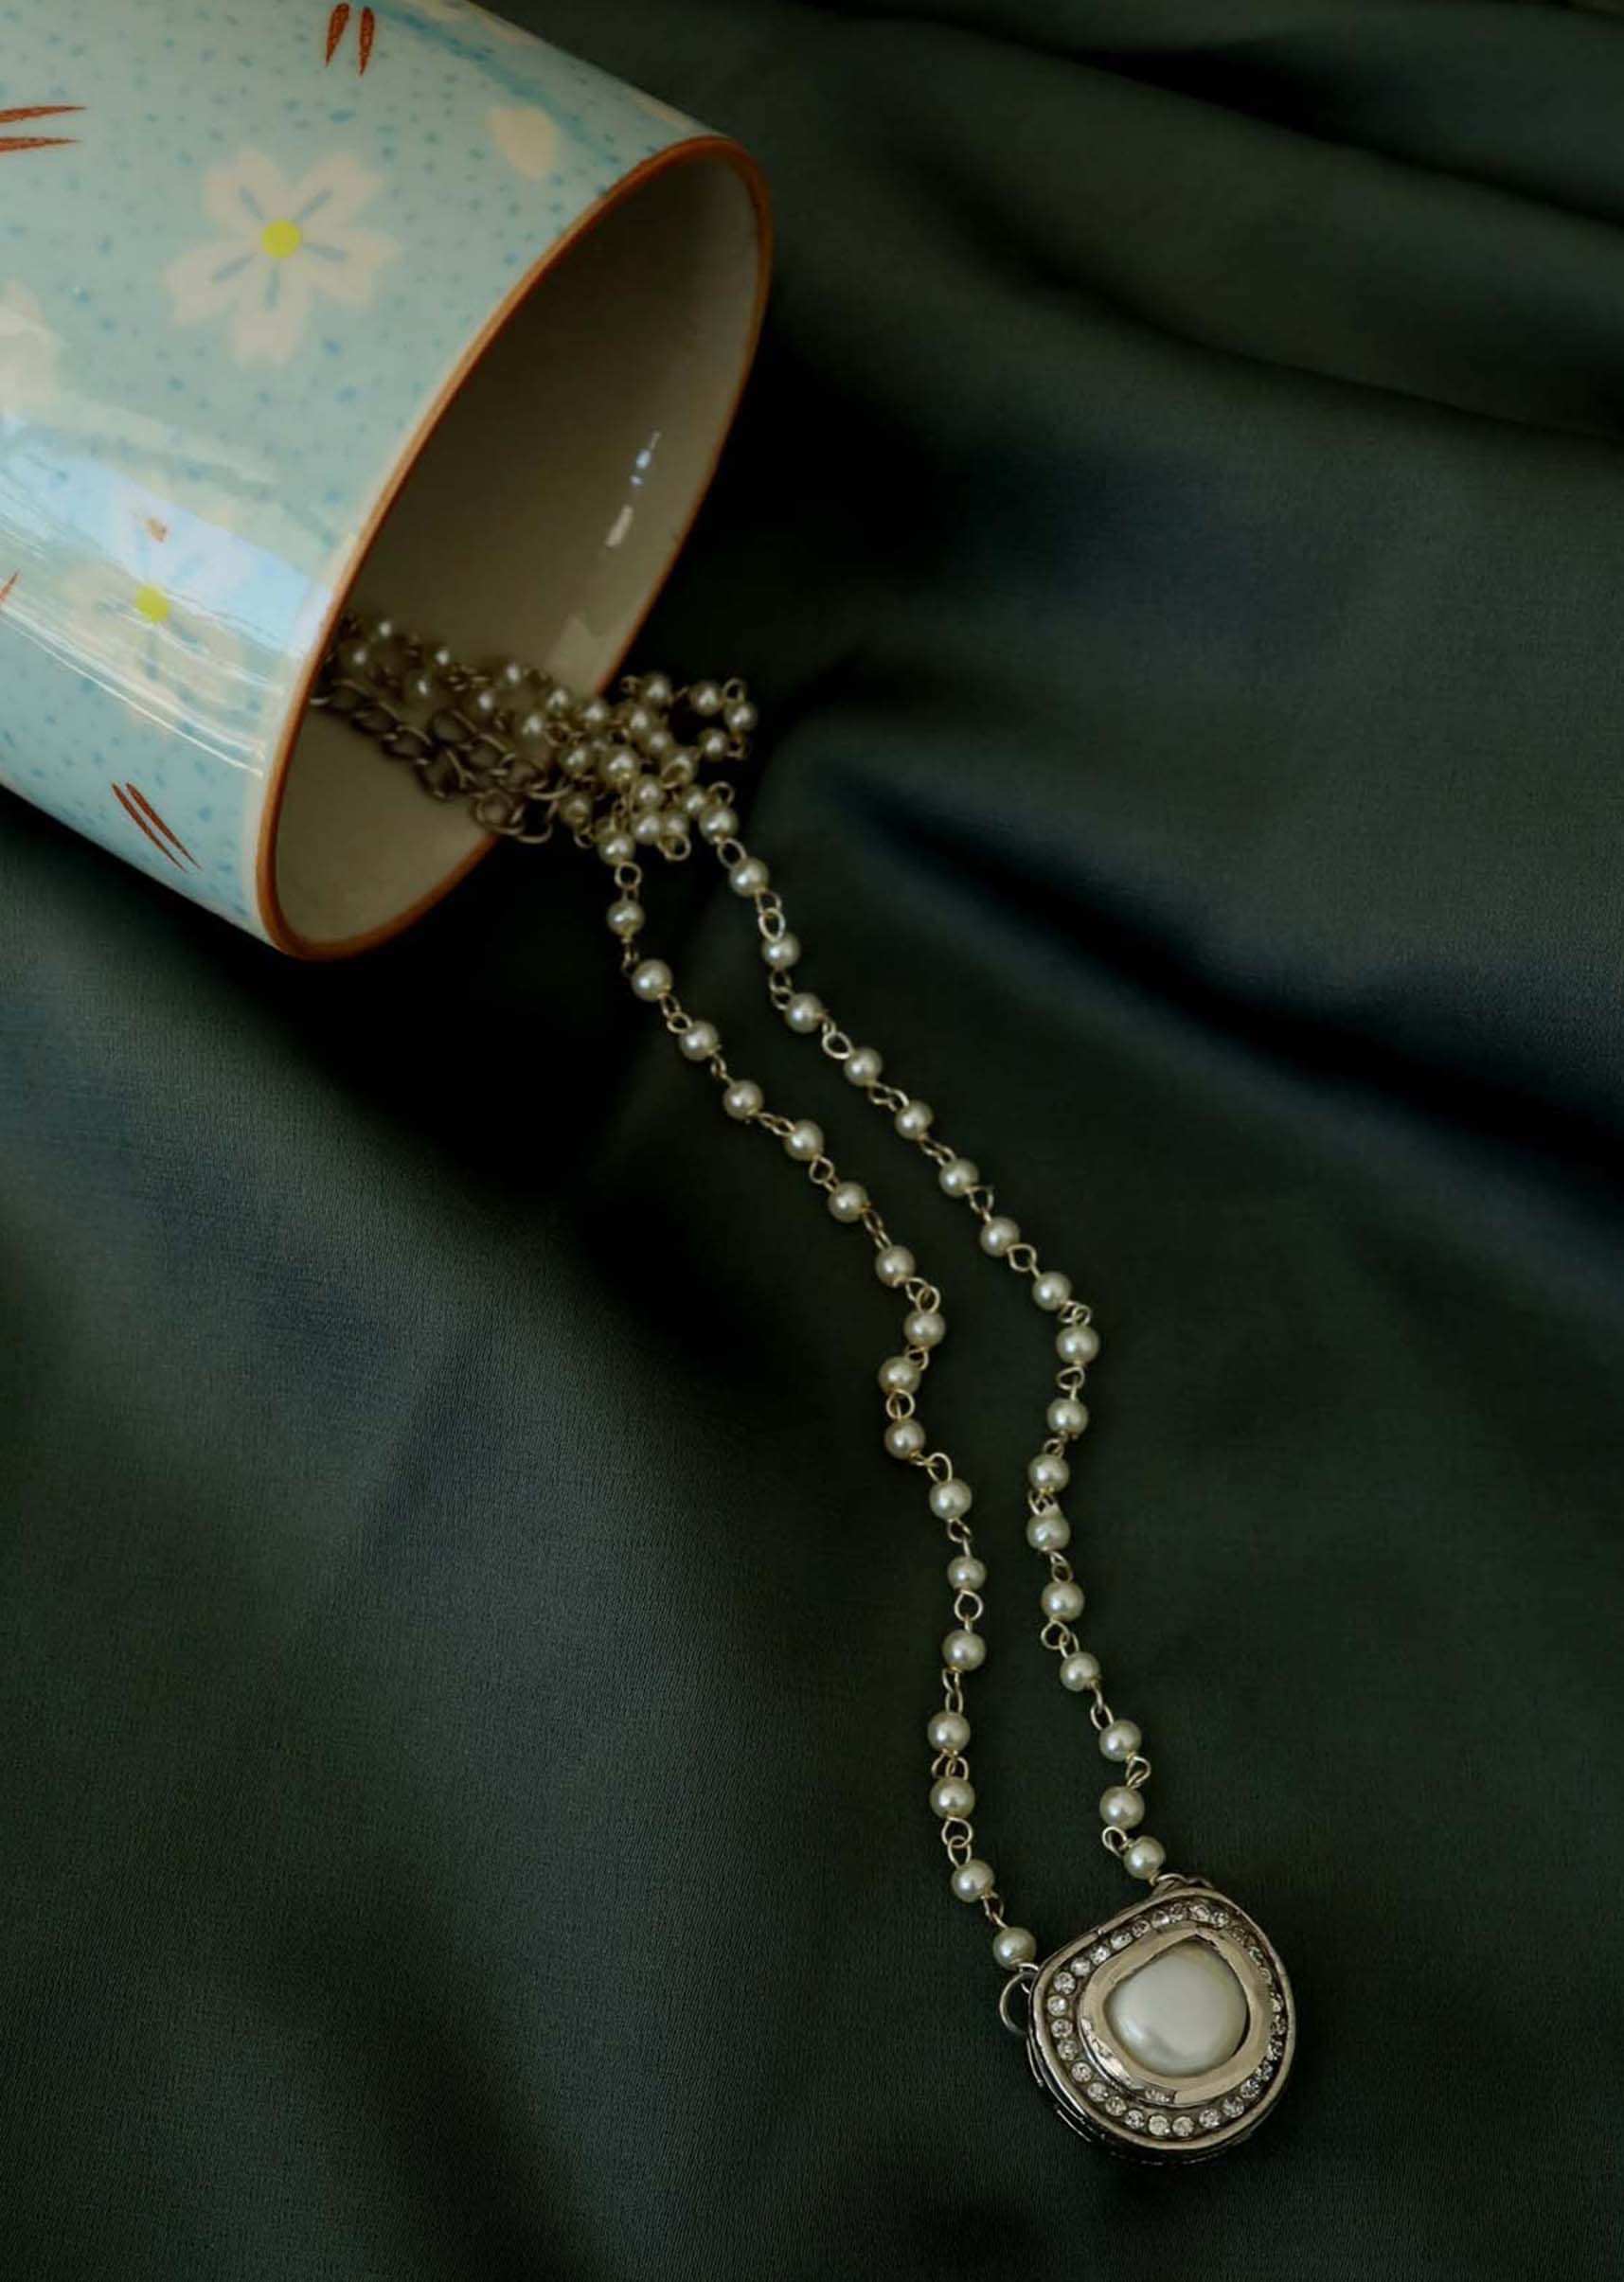 Silver Necklace With Pearl Strewn Chain And A Kundan Pendant In The Centre